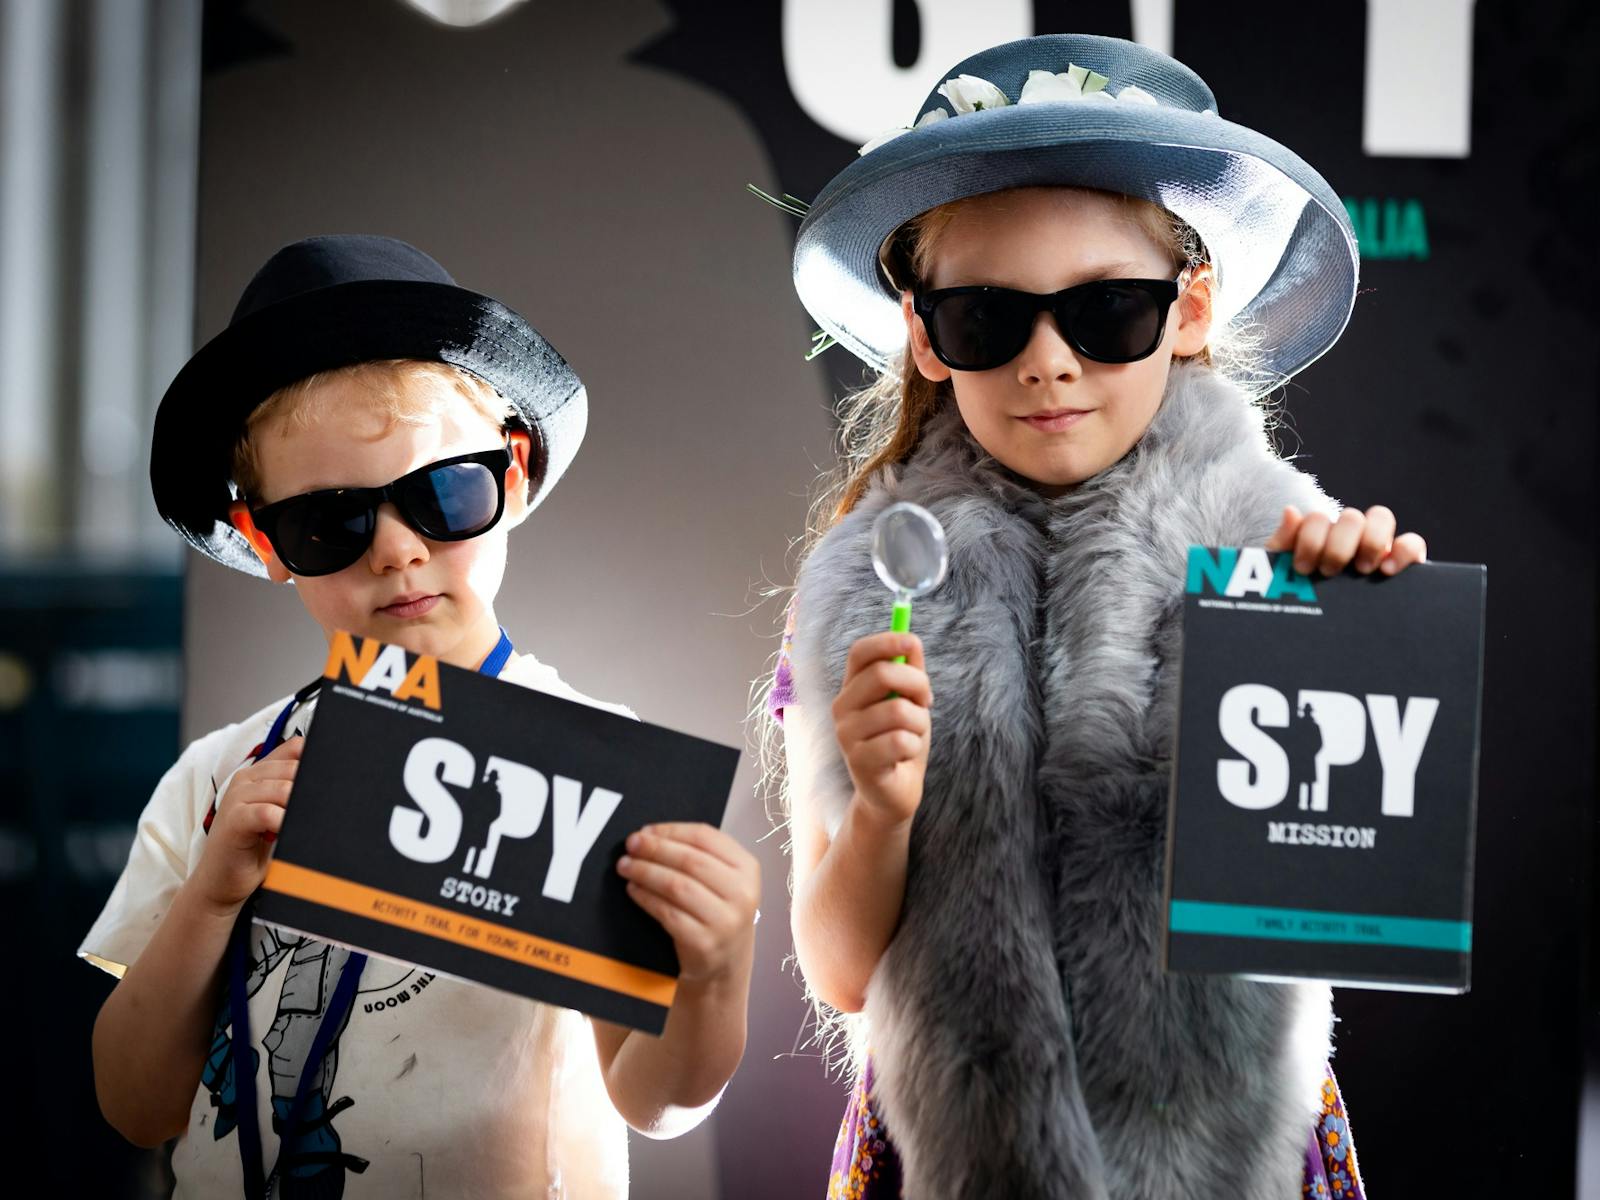 Young boy and girl dressed in spy costumes hold spy-themed activity booklets and magnifying glasses